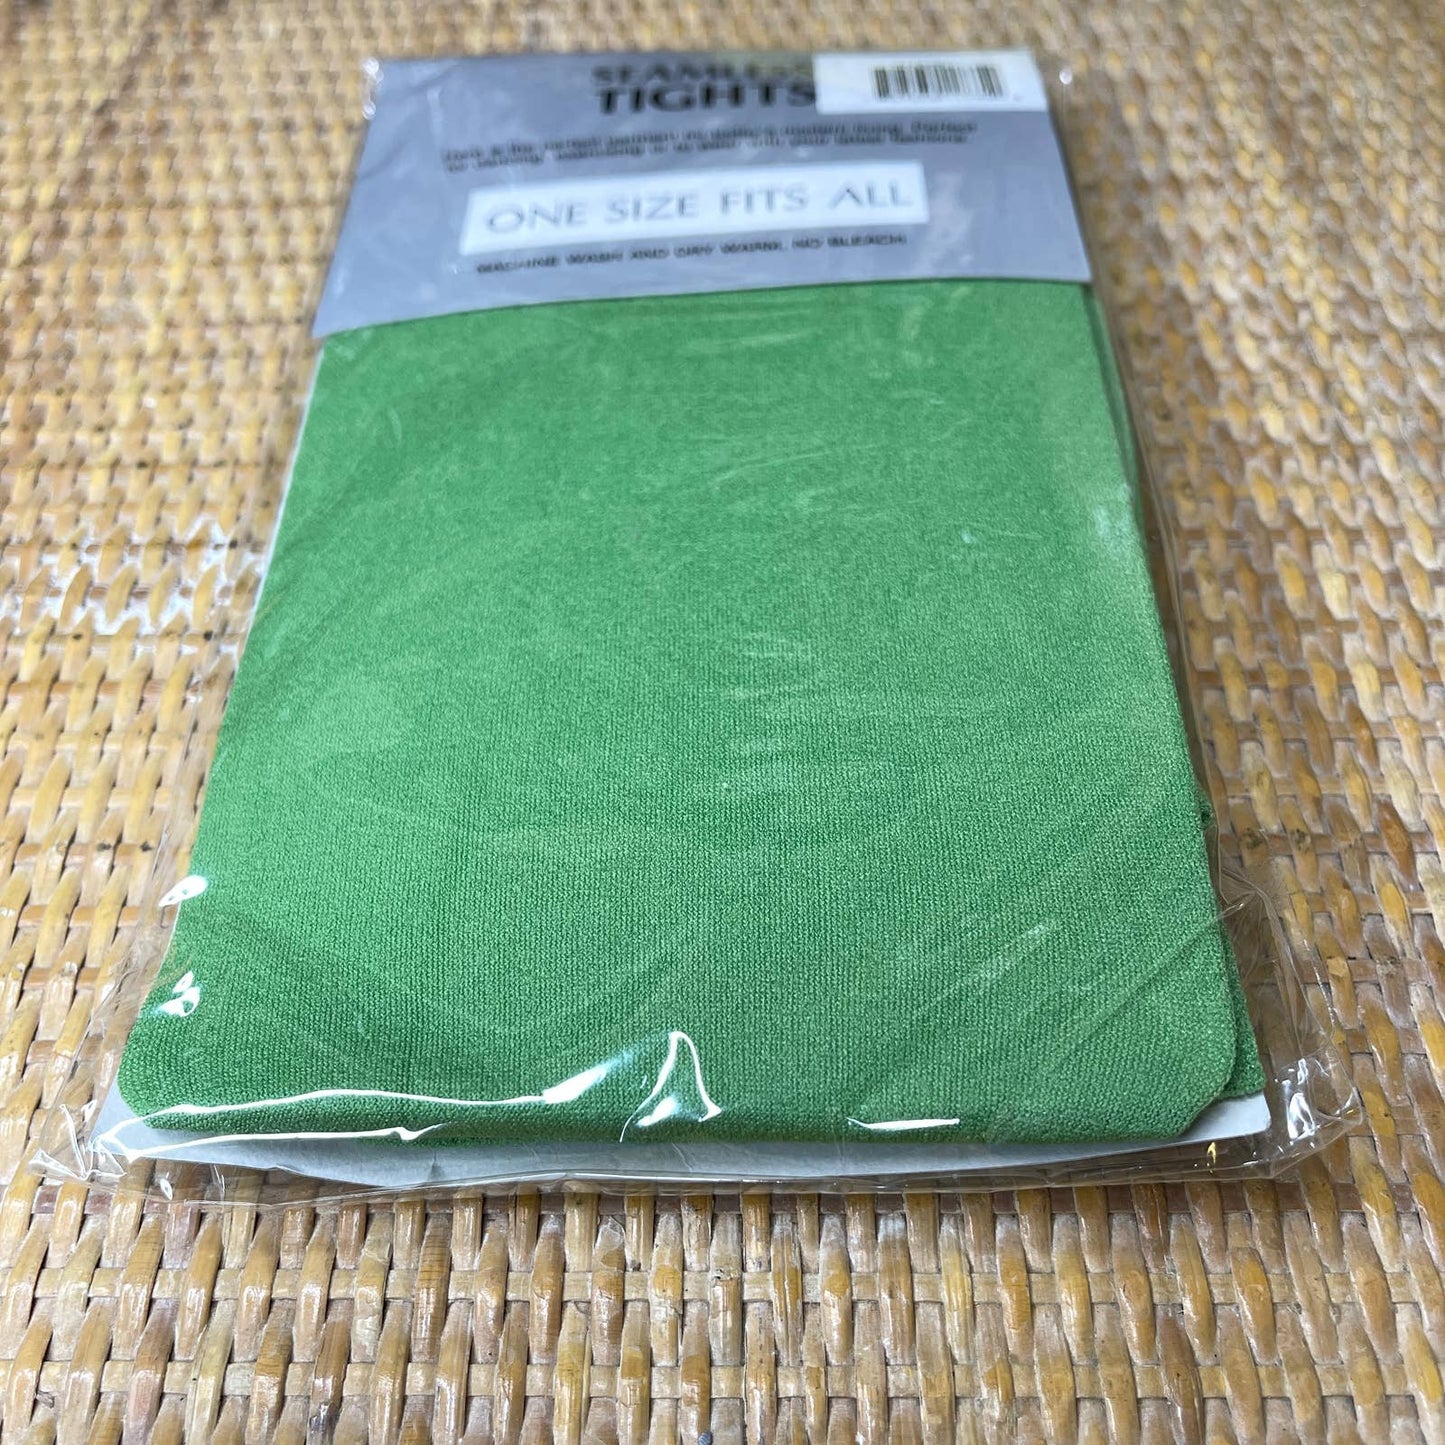 Kelly Green Seamless Tights One Size Fits All Nylon by Costume Mates